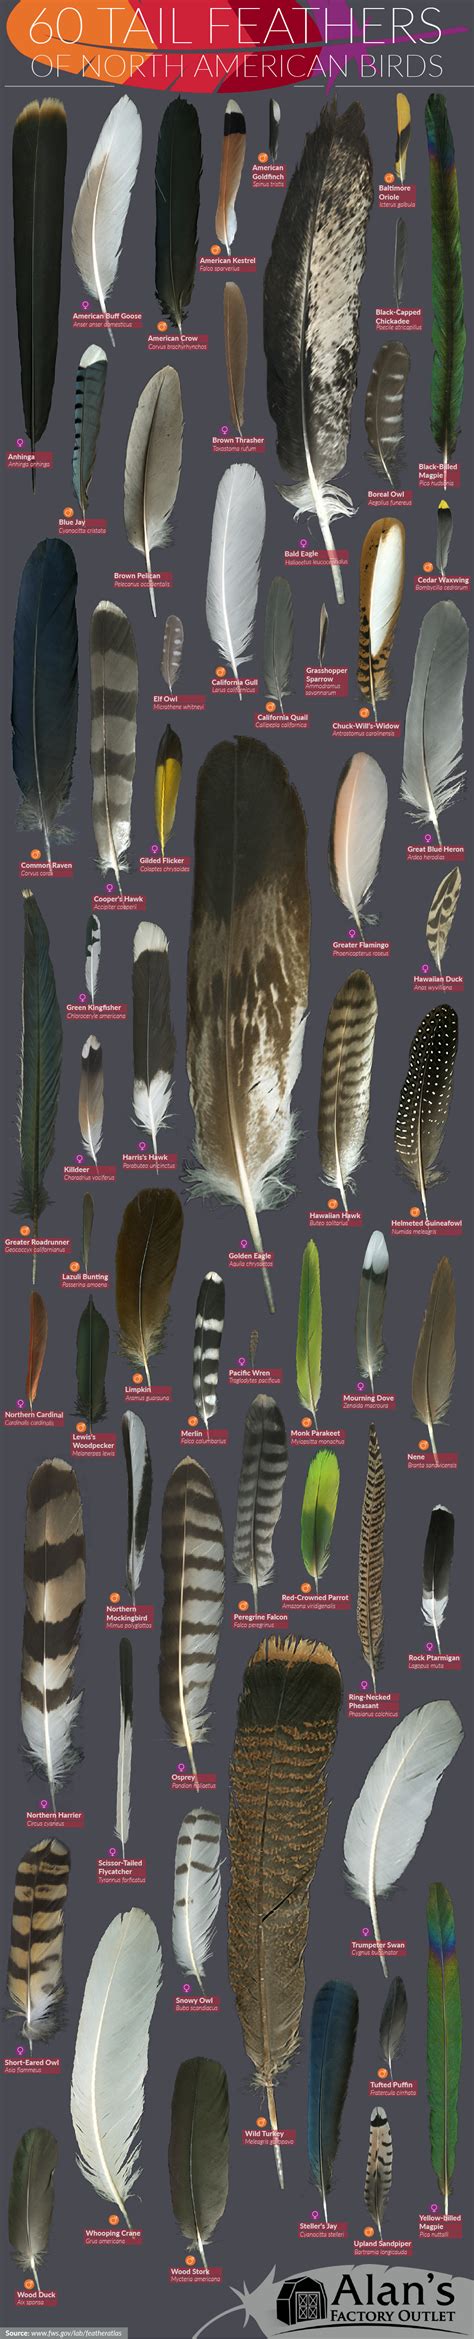 Typically, a bird’s feather is anywhere from one-third to about half-their full body length. Let’s look at the barn owl to understand how long feathers might get on an owl. For reference, the barn owl is typically 13-15 inches long with a wingspan between 31-37 inches or so in length. Barn Owl Secondary Wing Feathers..